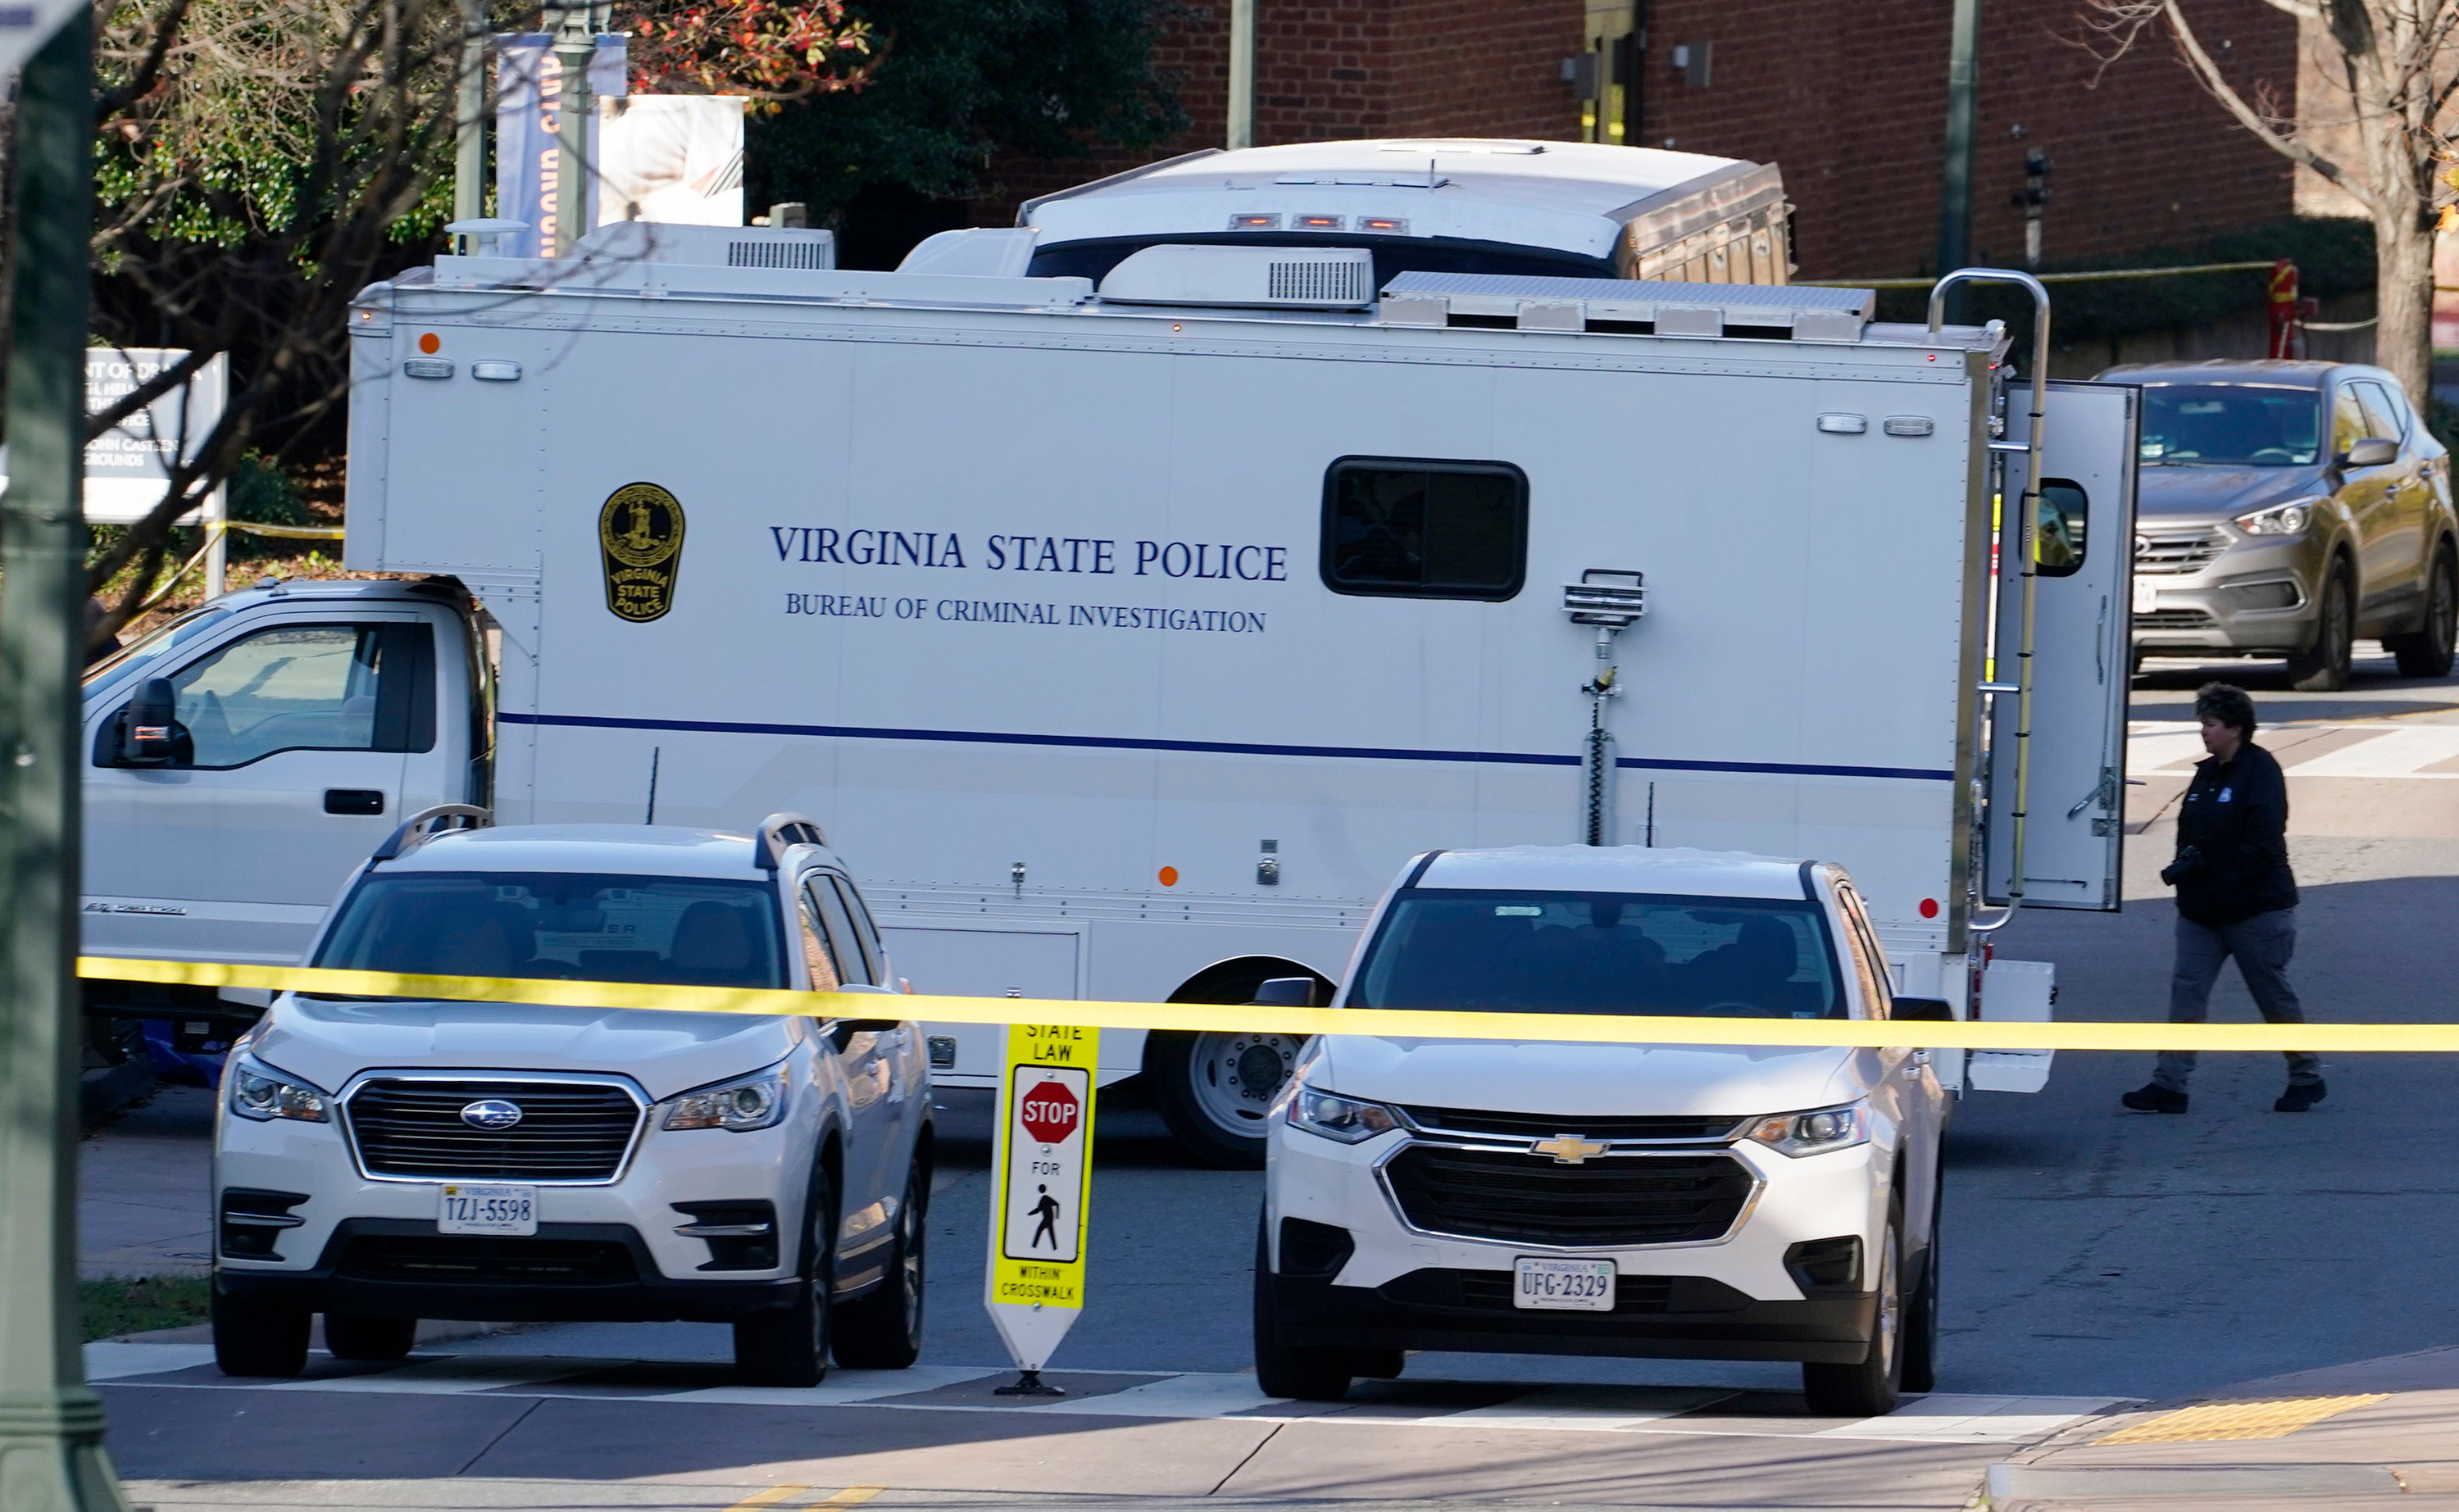 A Virginia State Police crime scene investigation truck is set up at the University of Virginia on Monday.